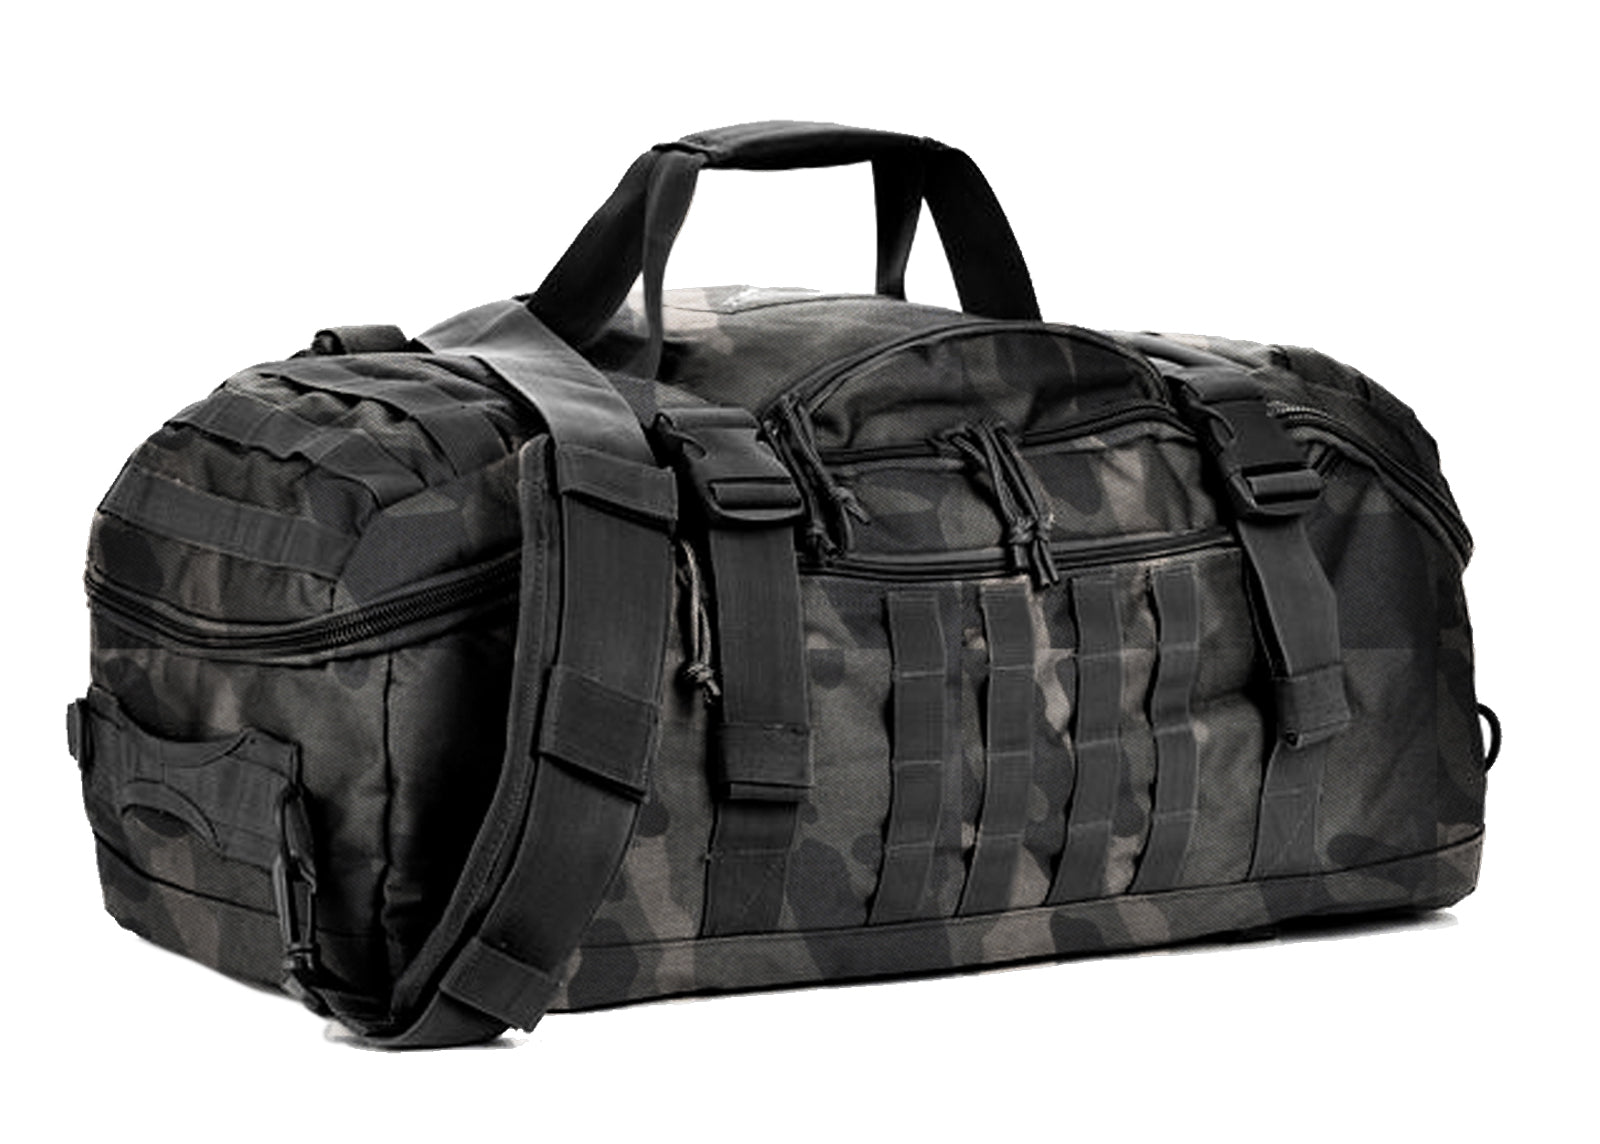 Gym Bag Duffle Bags Backpack Travel Weekender Bag for Men Women Workout Bag for Military,Sports,Overnight,Basketball,Tactical,Football